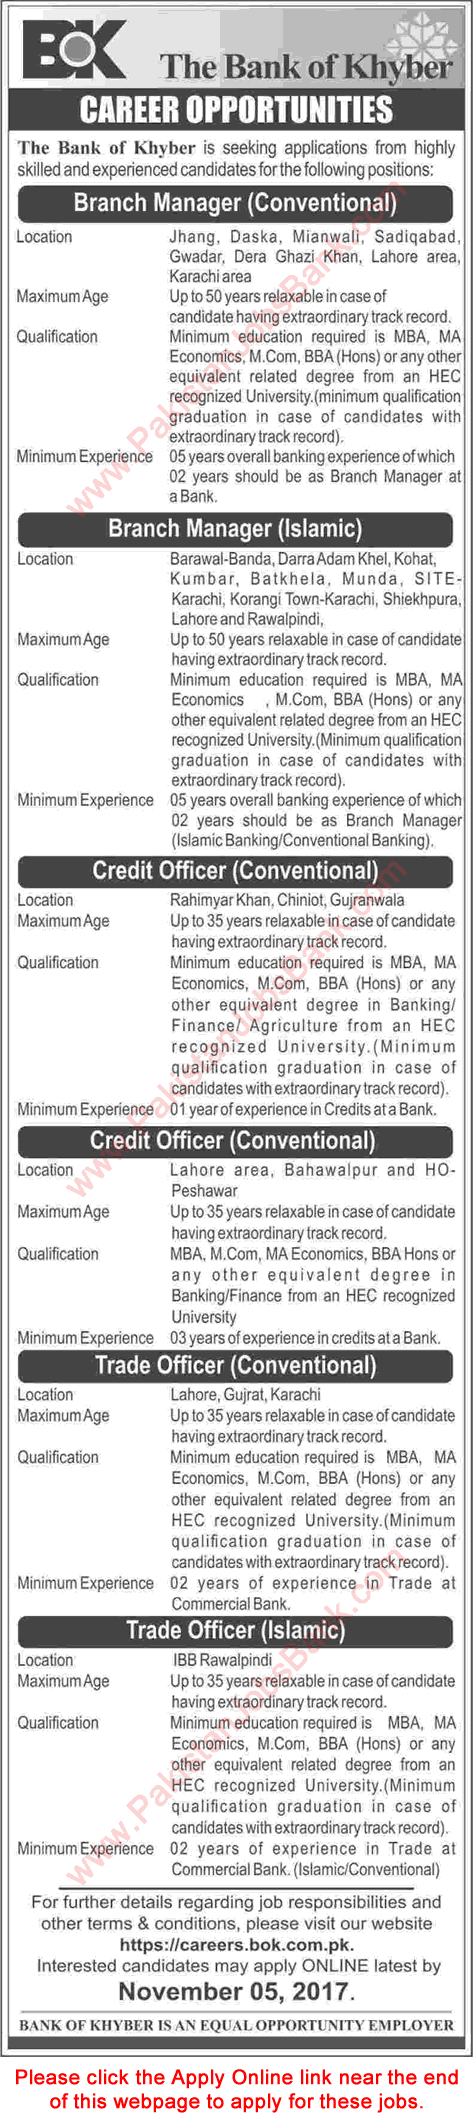 Bank of Khyber Jobs October 2017 November Apply Online Branch Managers, Trade & Credit Officers Latest